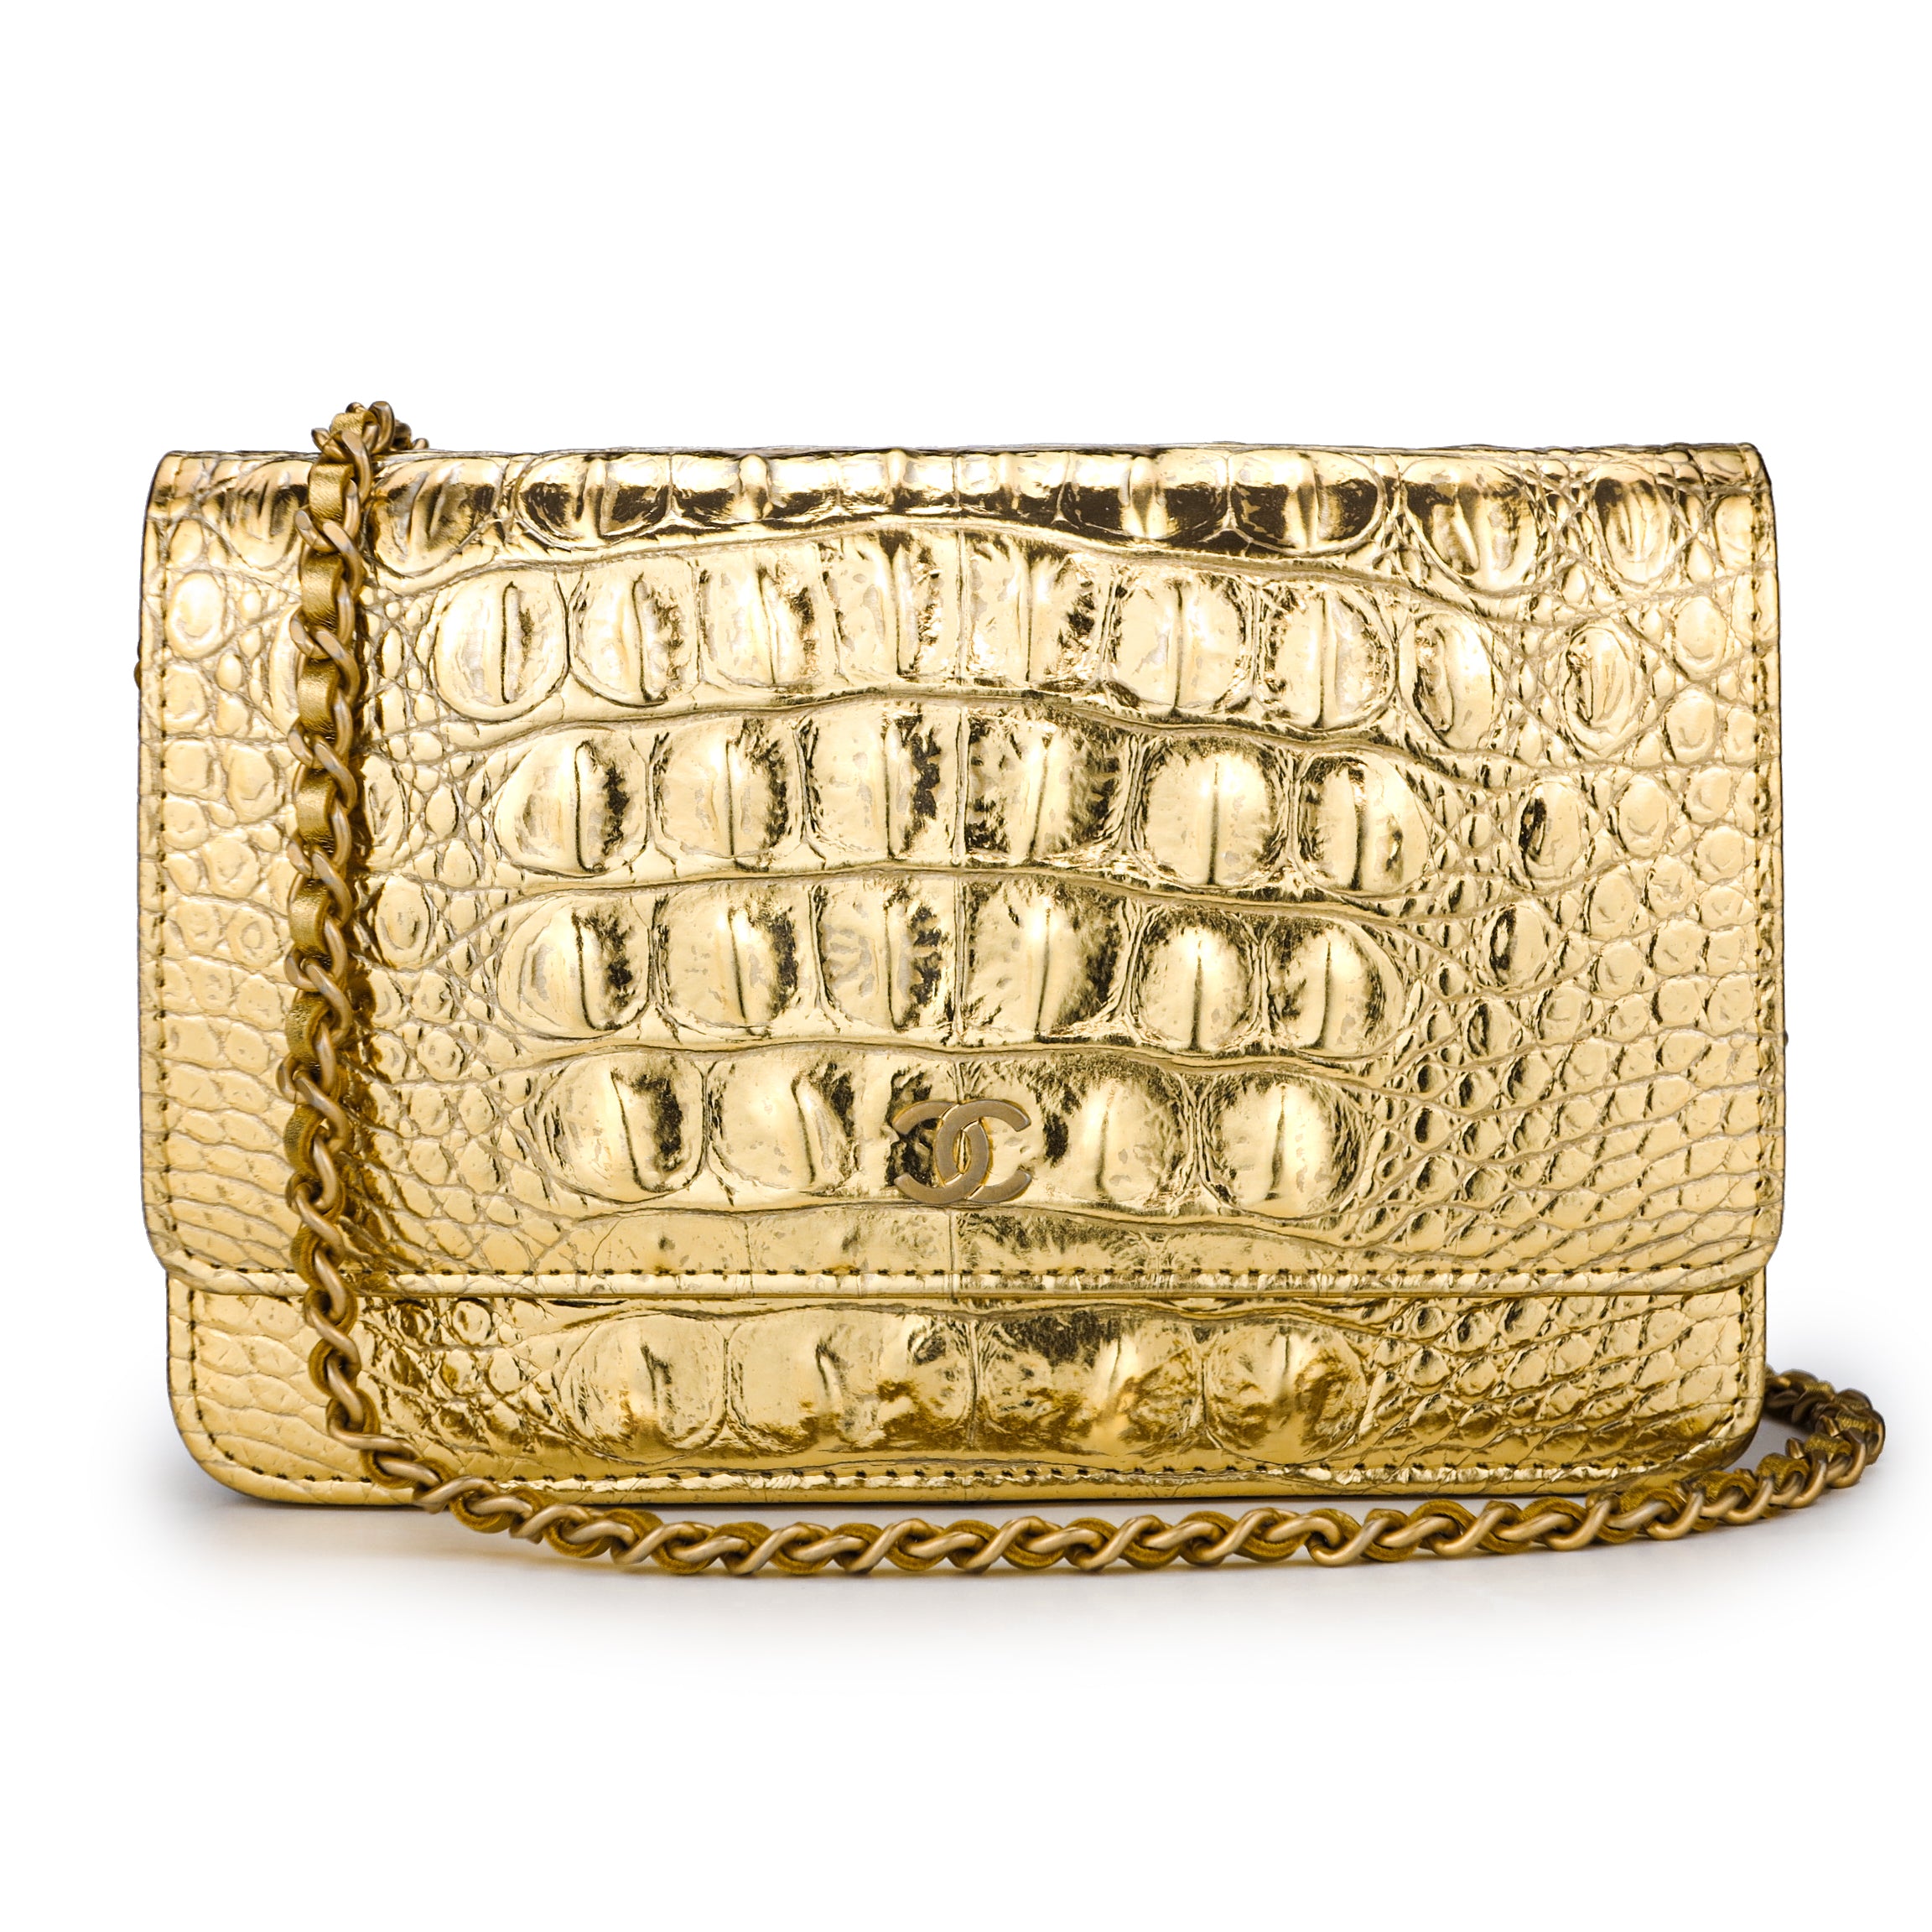 CHANEL Gold Metallic Crocodile Embossed Leather Small Wallet - ShopperBoard